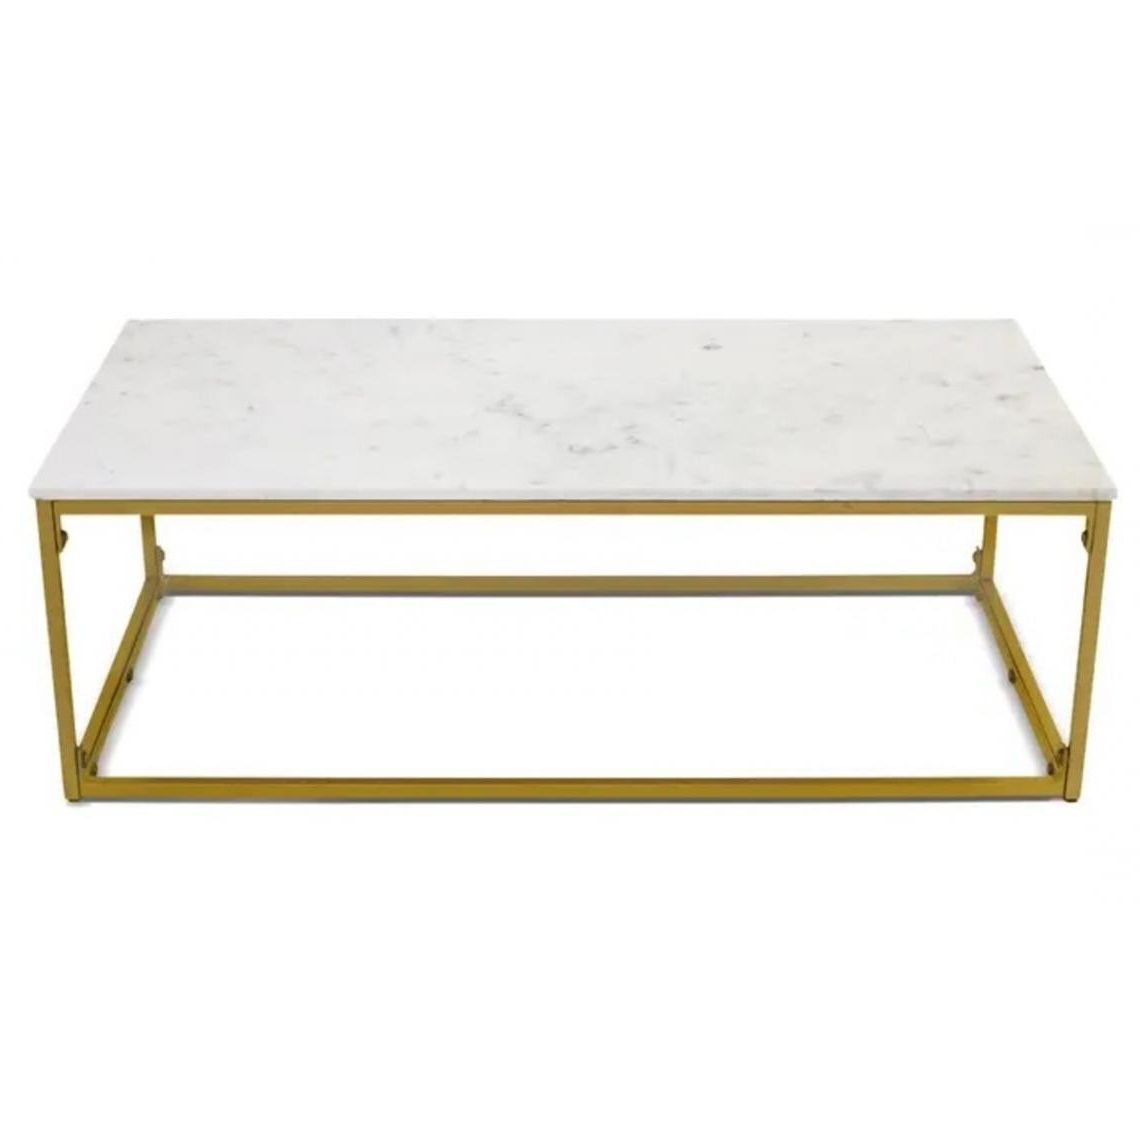 Fashionable Satin Gold Coffee Tables In Table Basse Rectangulaire Kalikor Pierre Effet Marbre Blanc Et Métal Or –  Table Basse Pas Cher (View 12 of 20)